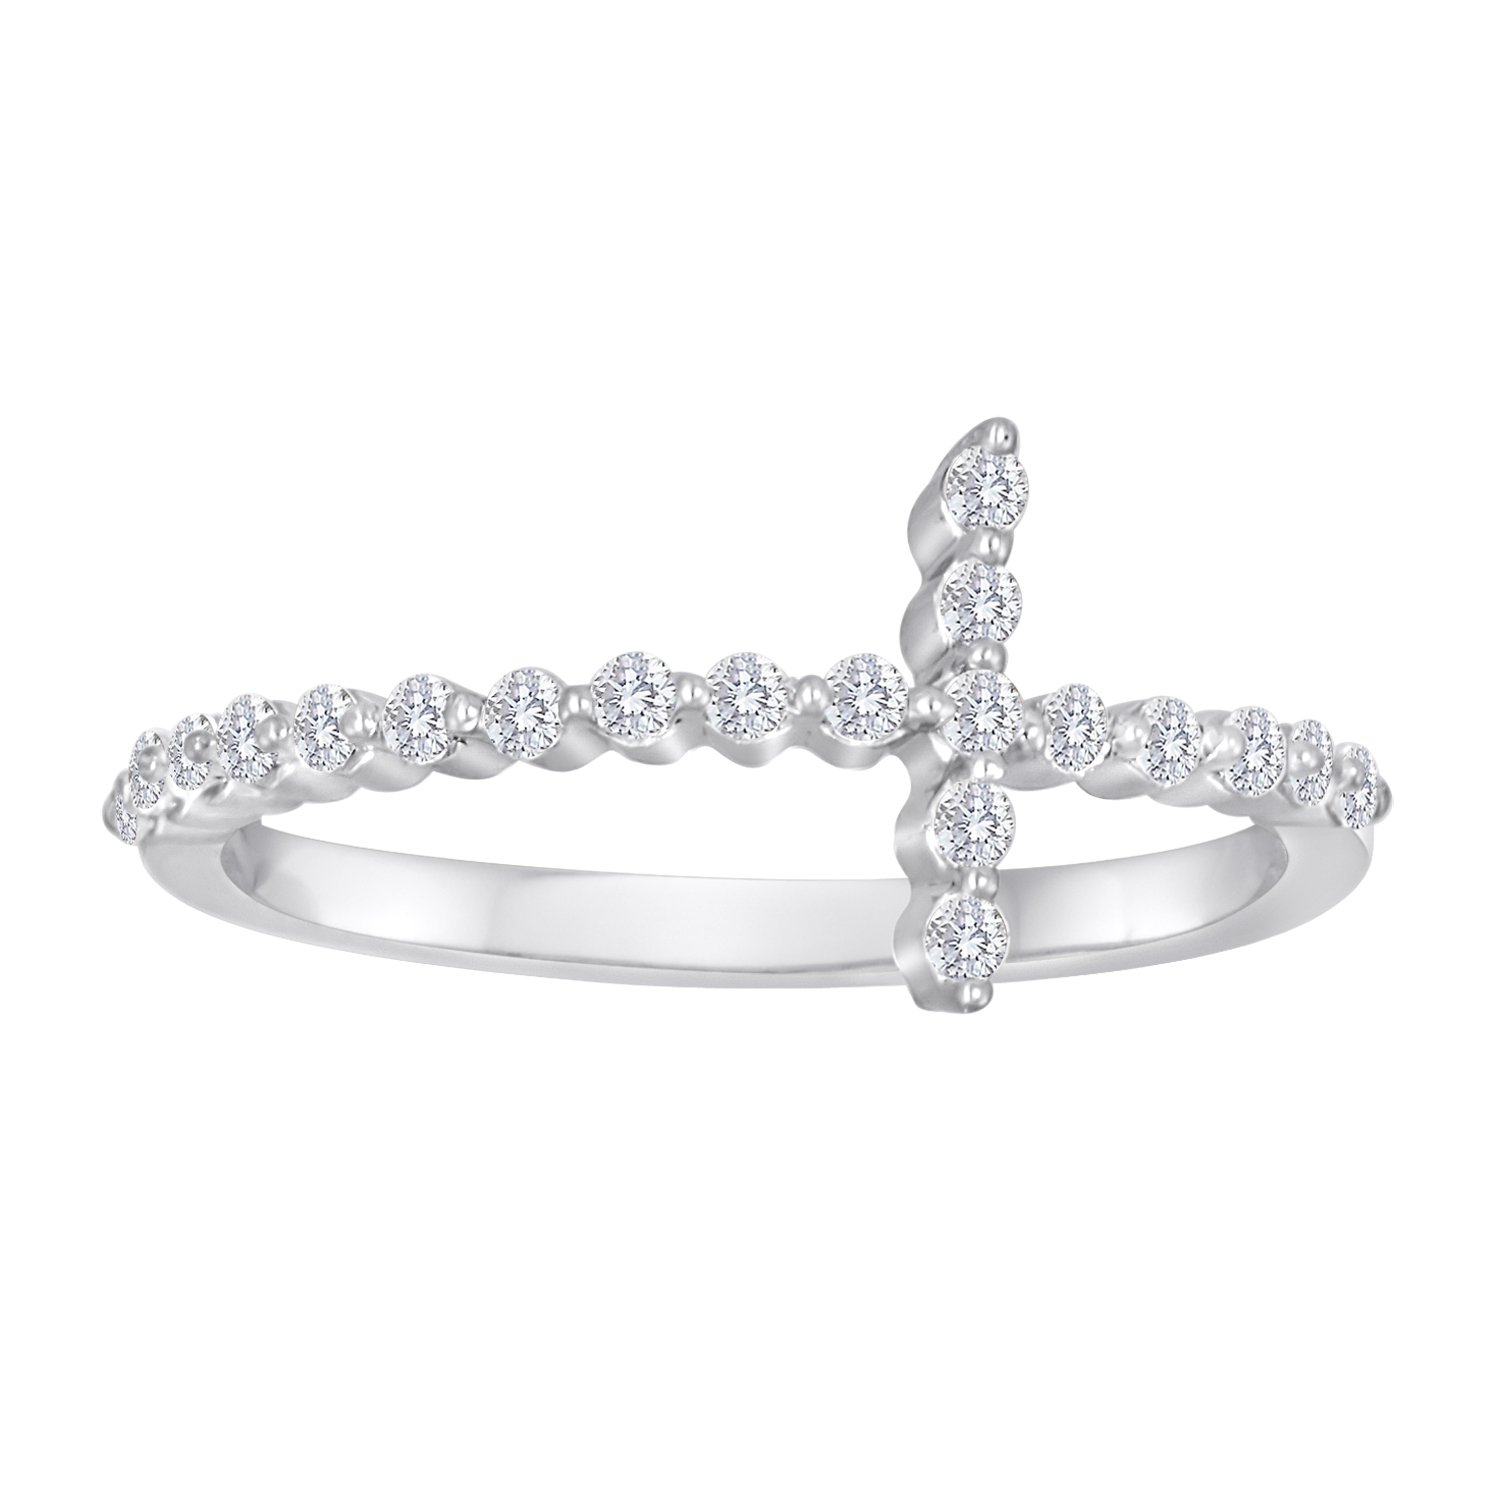 Linked In Love 1/4 cttw Diamond Cross Ring - Size 7 Only